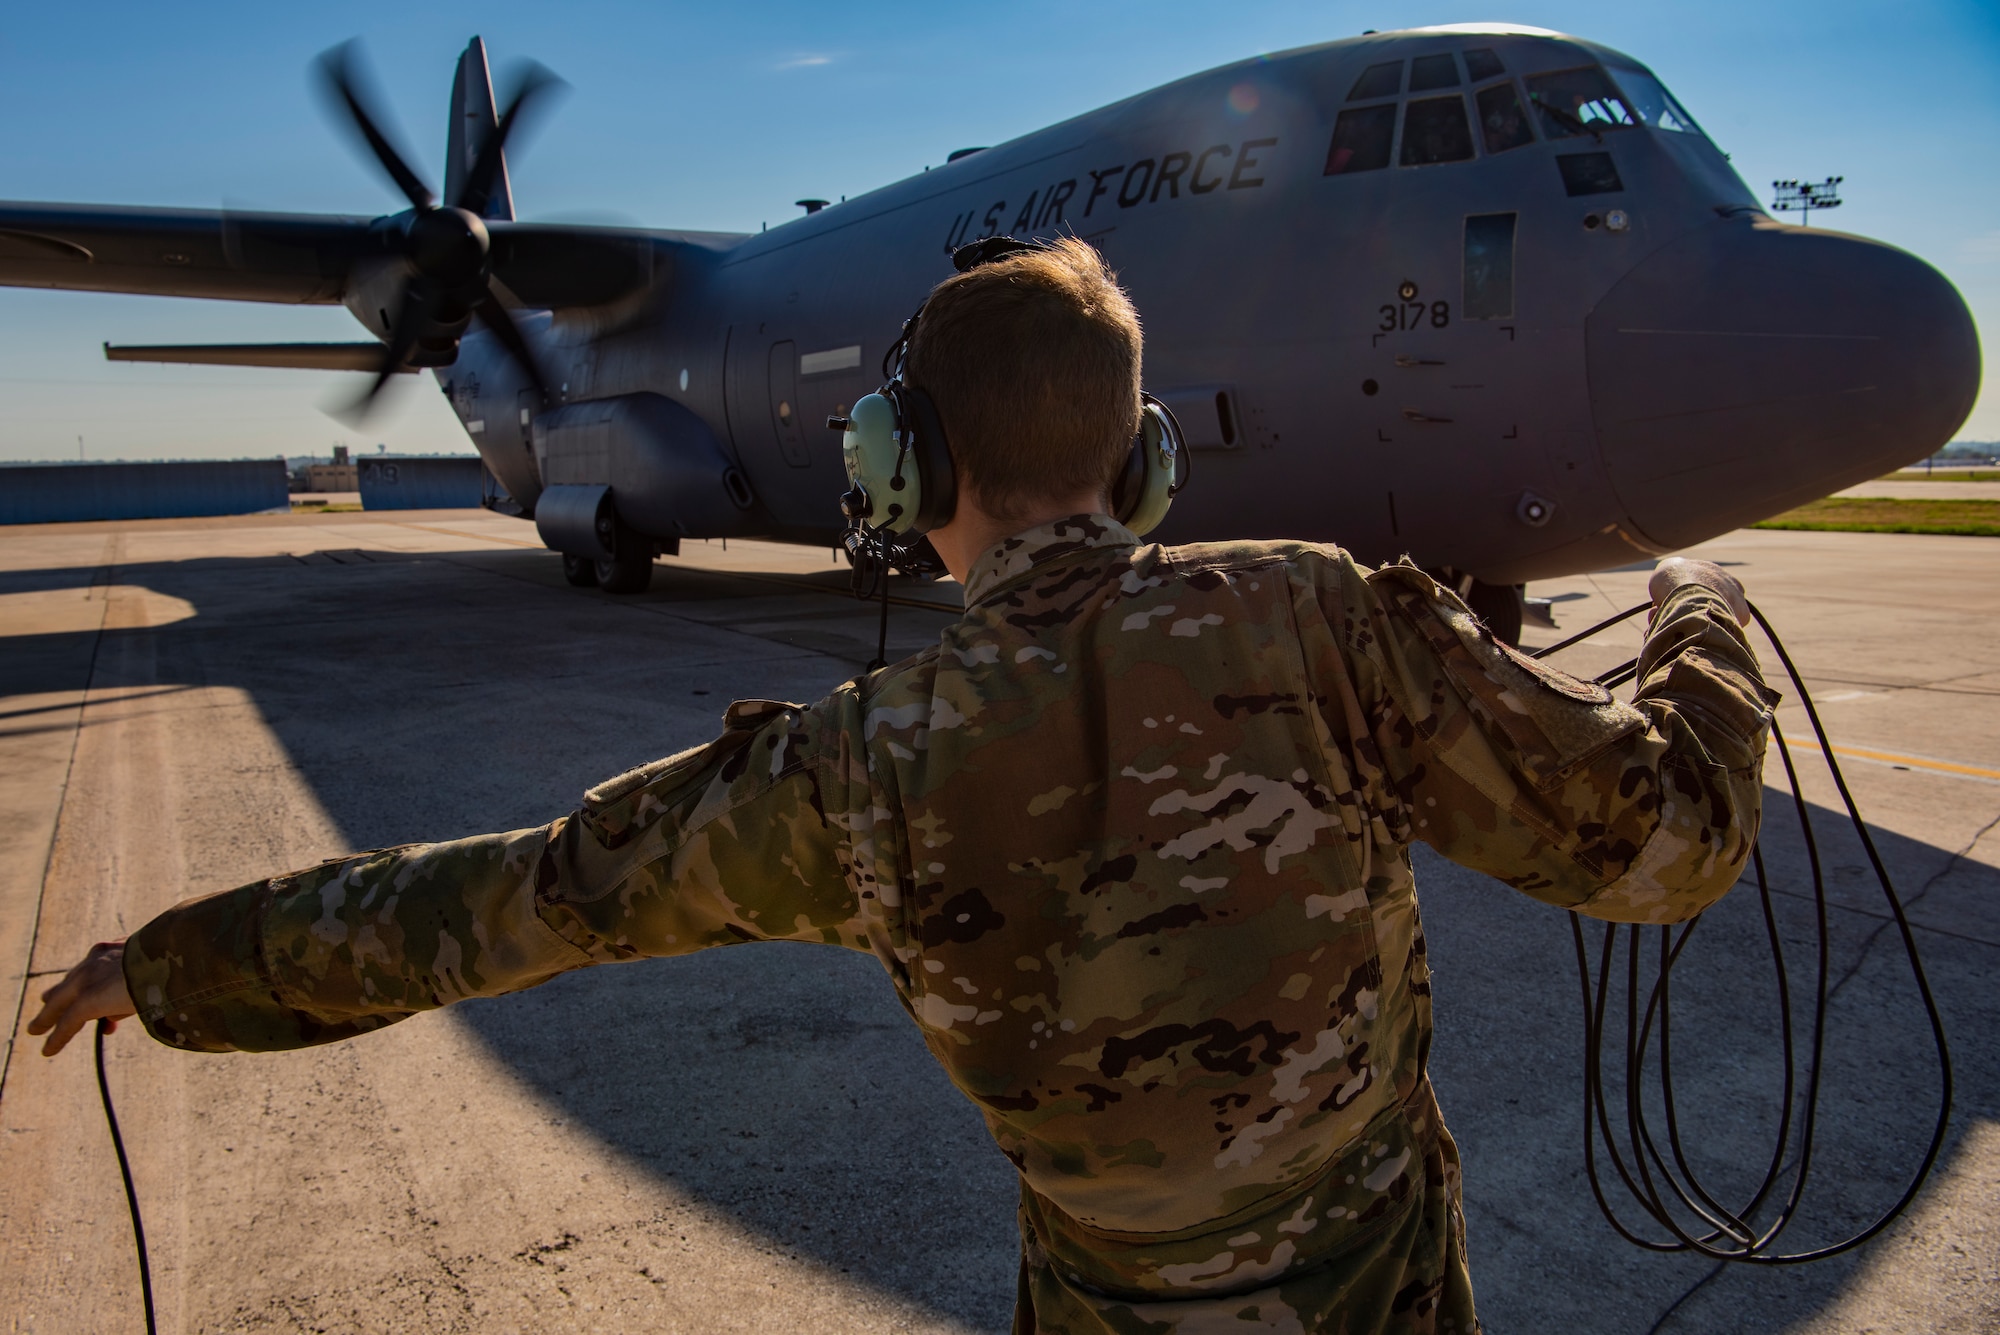 Airman 1st Class Ryker Kiselewski, 39th Airlift Squadron loadmaster, clears the propellers during an engine start of a C-130J Super Hercules during exercise Patriot Fury at Naval Air Station Fort Worth, Texas, Aug. 27, 2022. Clearing the propellers during engine start is an essential component to ensure the safety of personnel. (U.S. Air Force photo by Airman 1st Class Ryan Hayman)